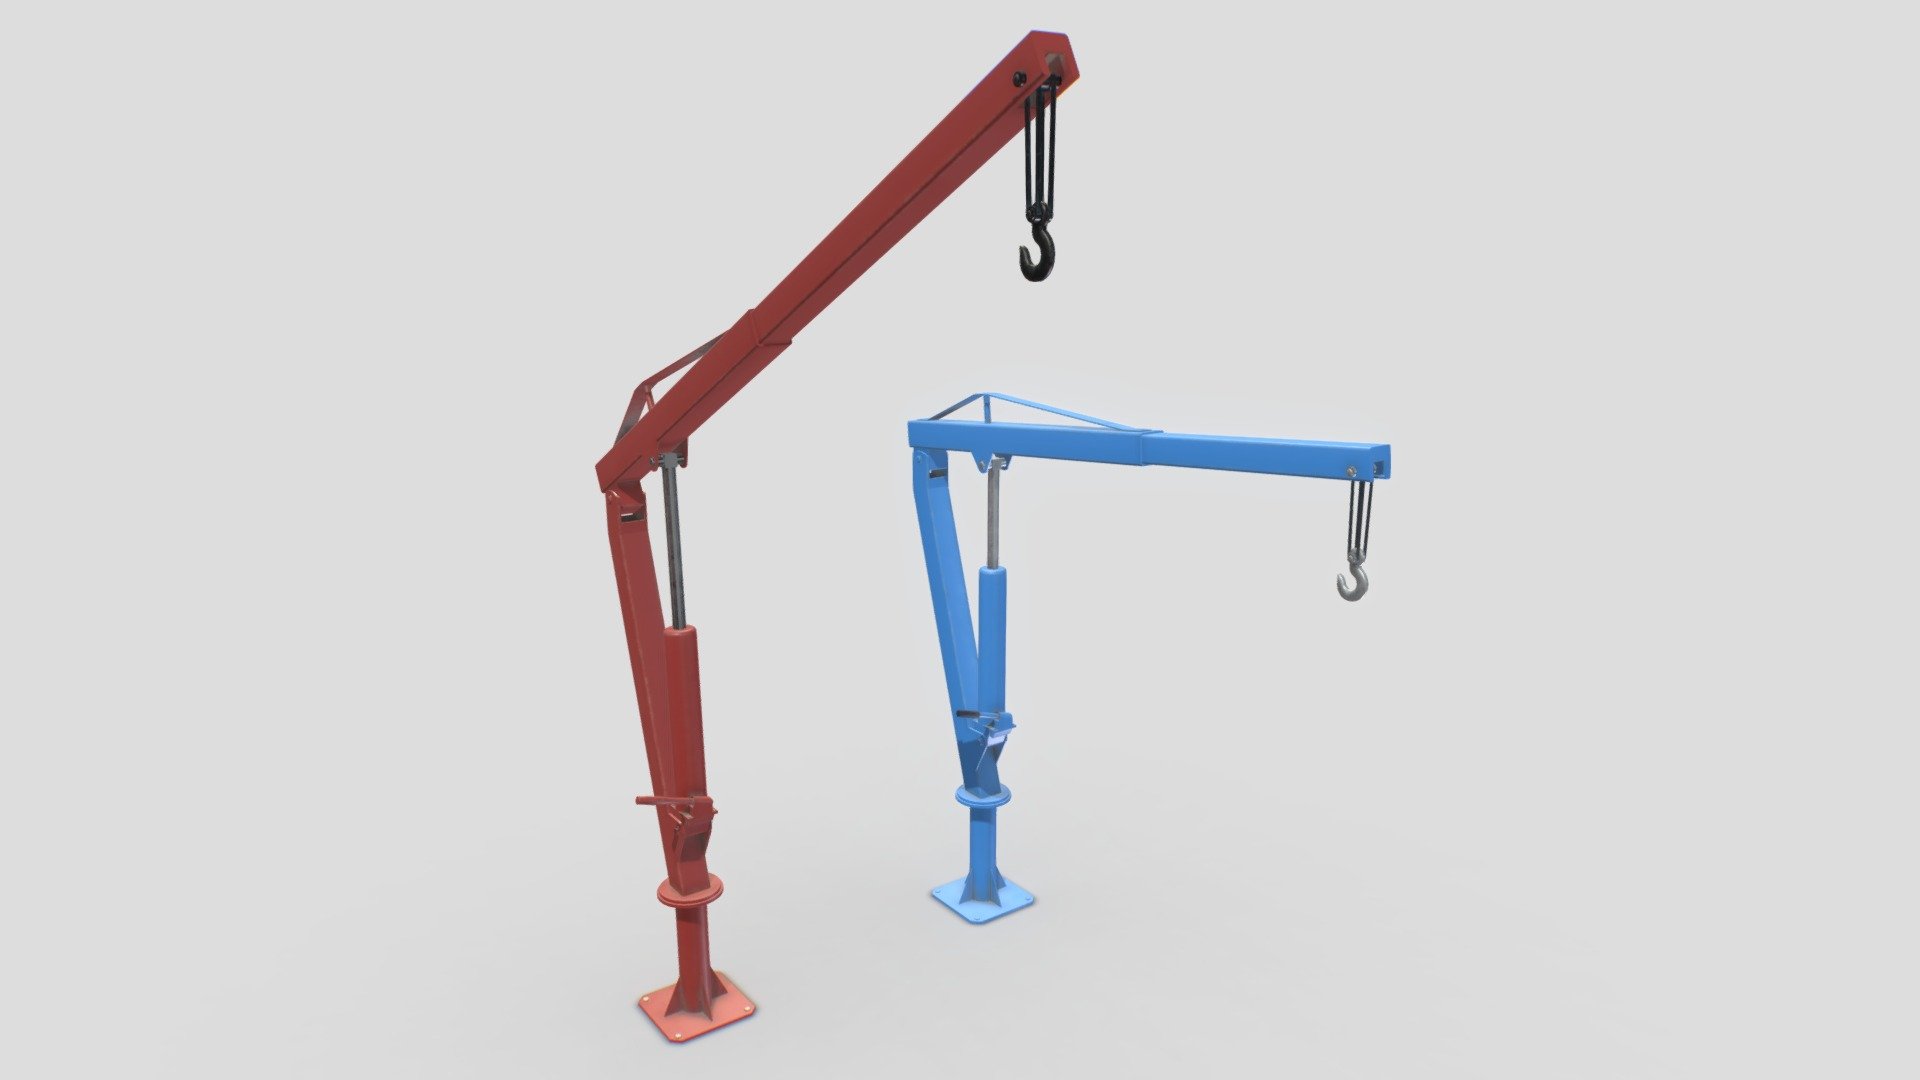 Engine crane based in real one. Real scale. 1 material.

Comes with 2 set of PBR 4096x PBR textures including Albedo, Normal, Metalness, Roughness and AO. Unreal ARM mask texture included (ao, rough, metal) and unity HDRP mask.

Total tris 12000. 6000 verts. Comes as full object and in separate objects in case it need to be animated.

Suitable for workshops, garages, factories, hangars, warehouses, etc. 3d model